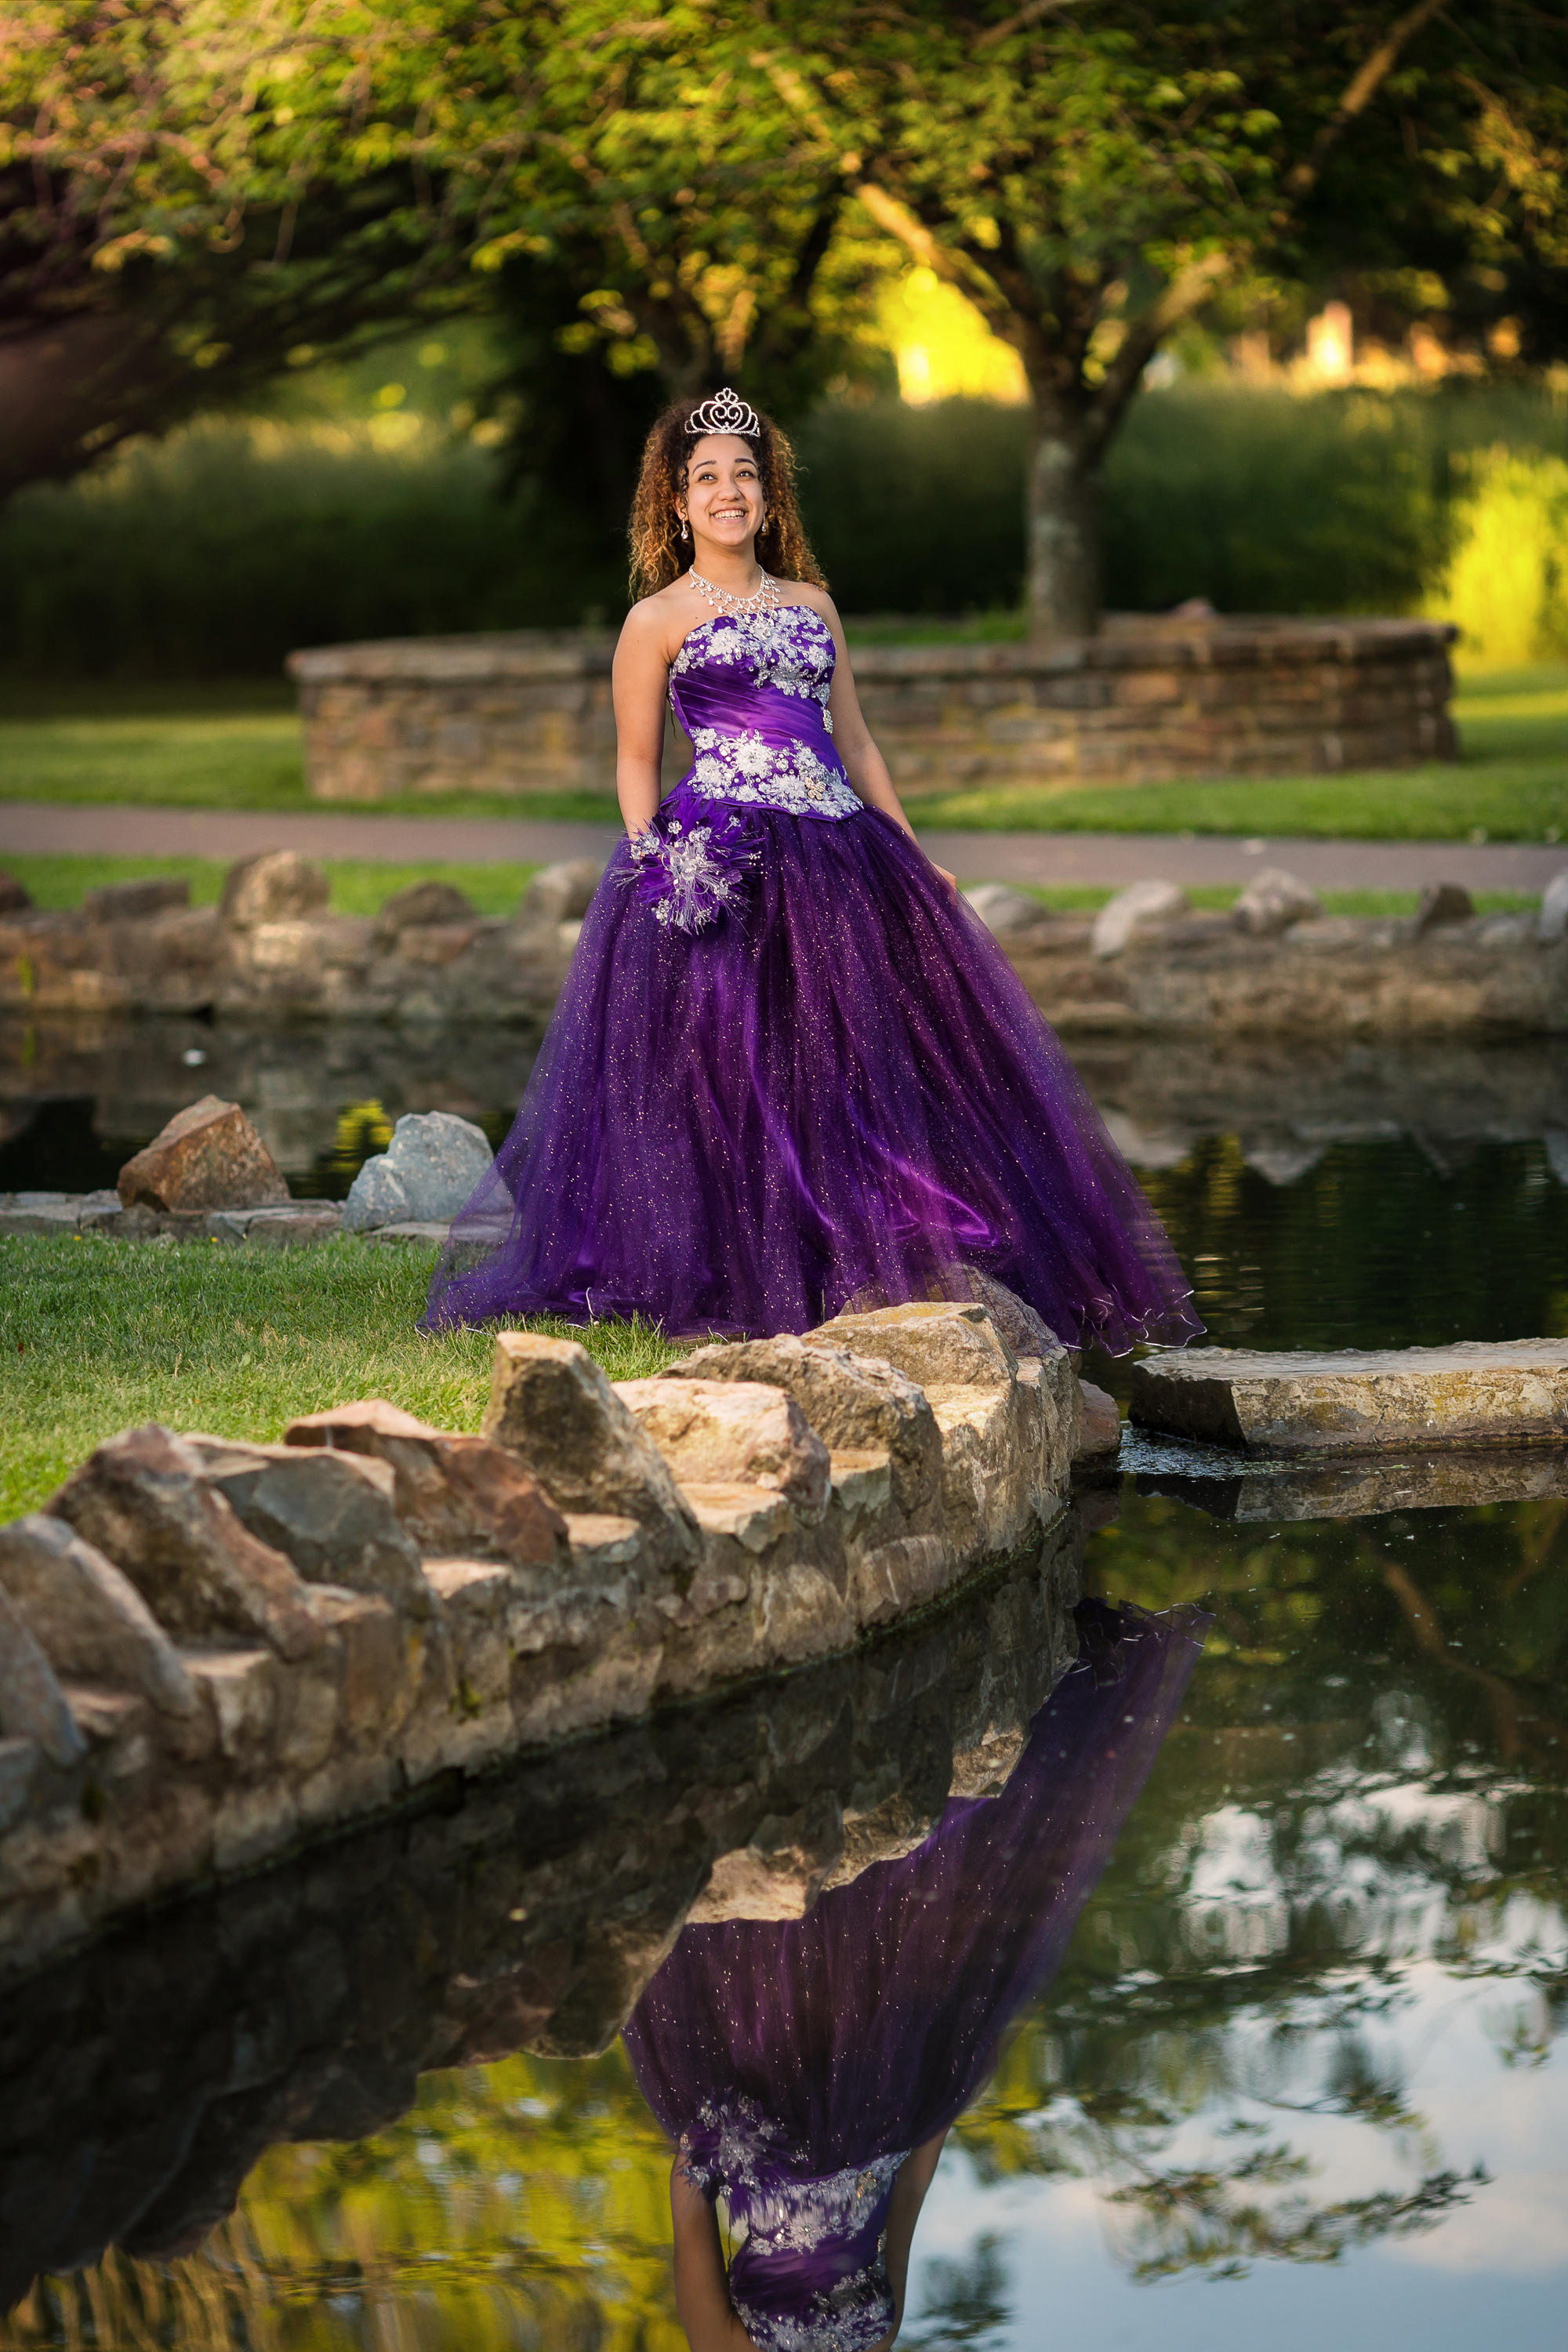 Natalias-Quince-Session-Garcia-Photography-2179.jpg